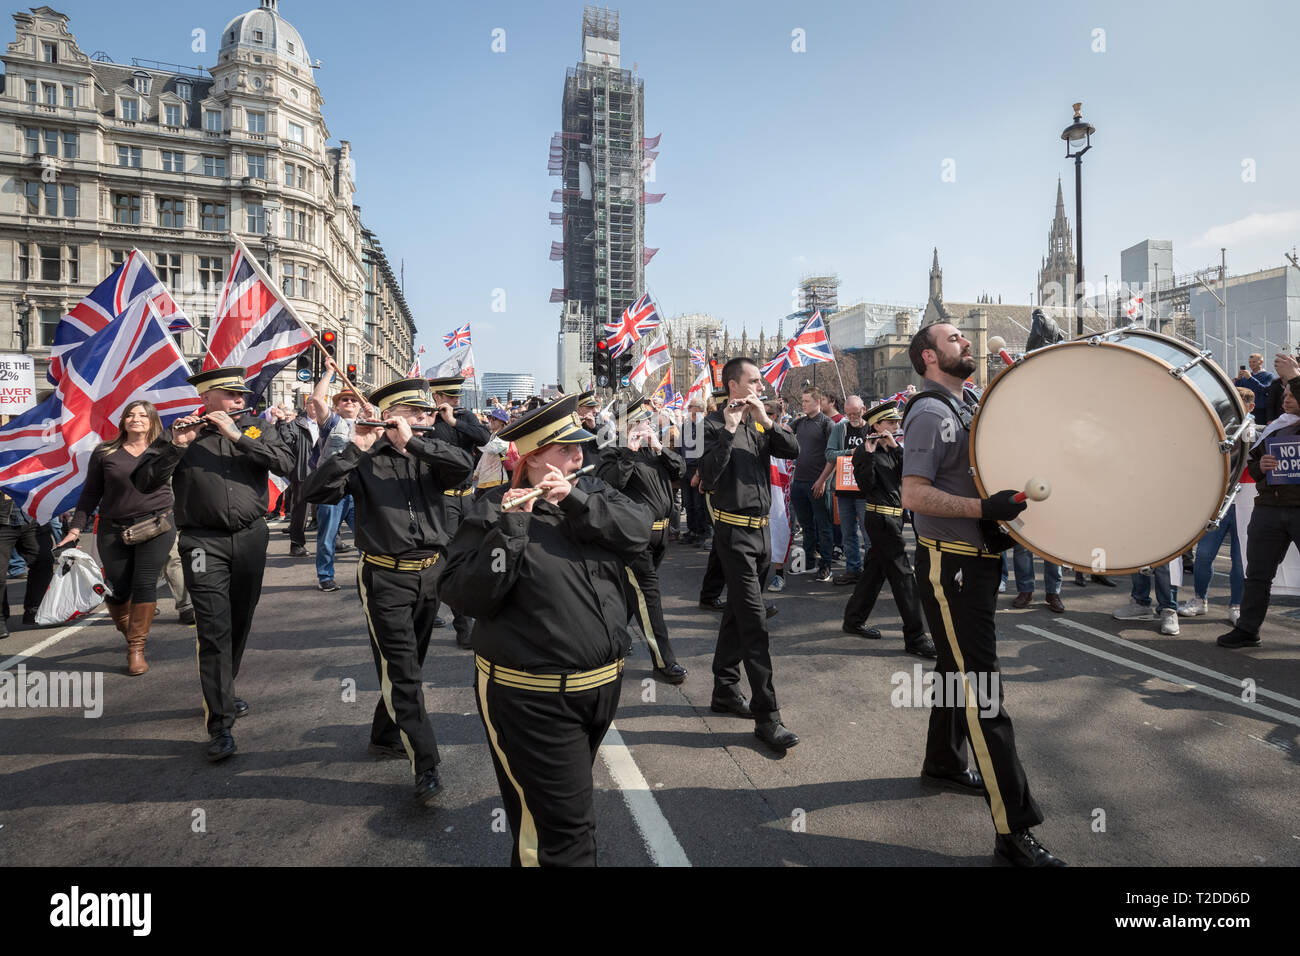 Scottish Loyalist flute band joins pro-Brexit supporters for ‘Brexit Day’ protest in Westminster demanding Britain leaves the EU without delay. Stock Photo